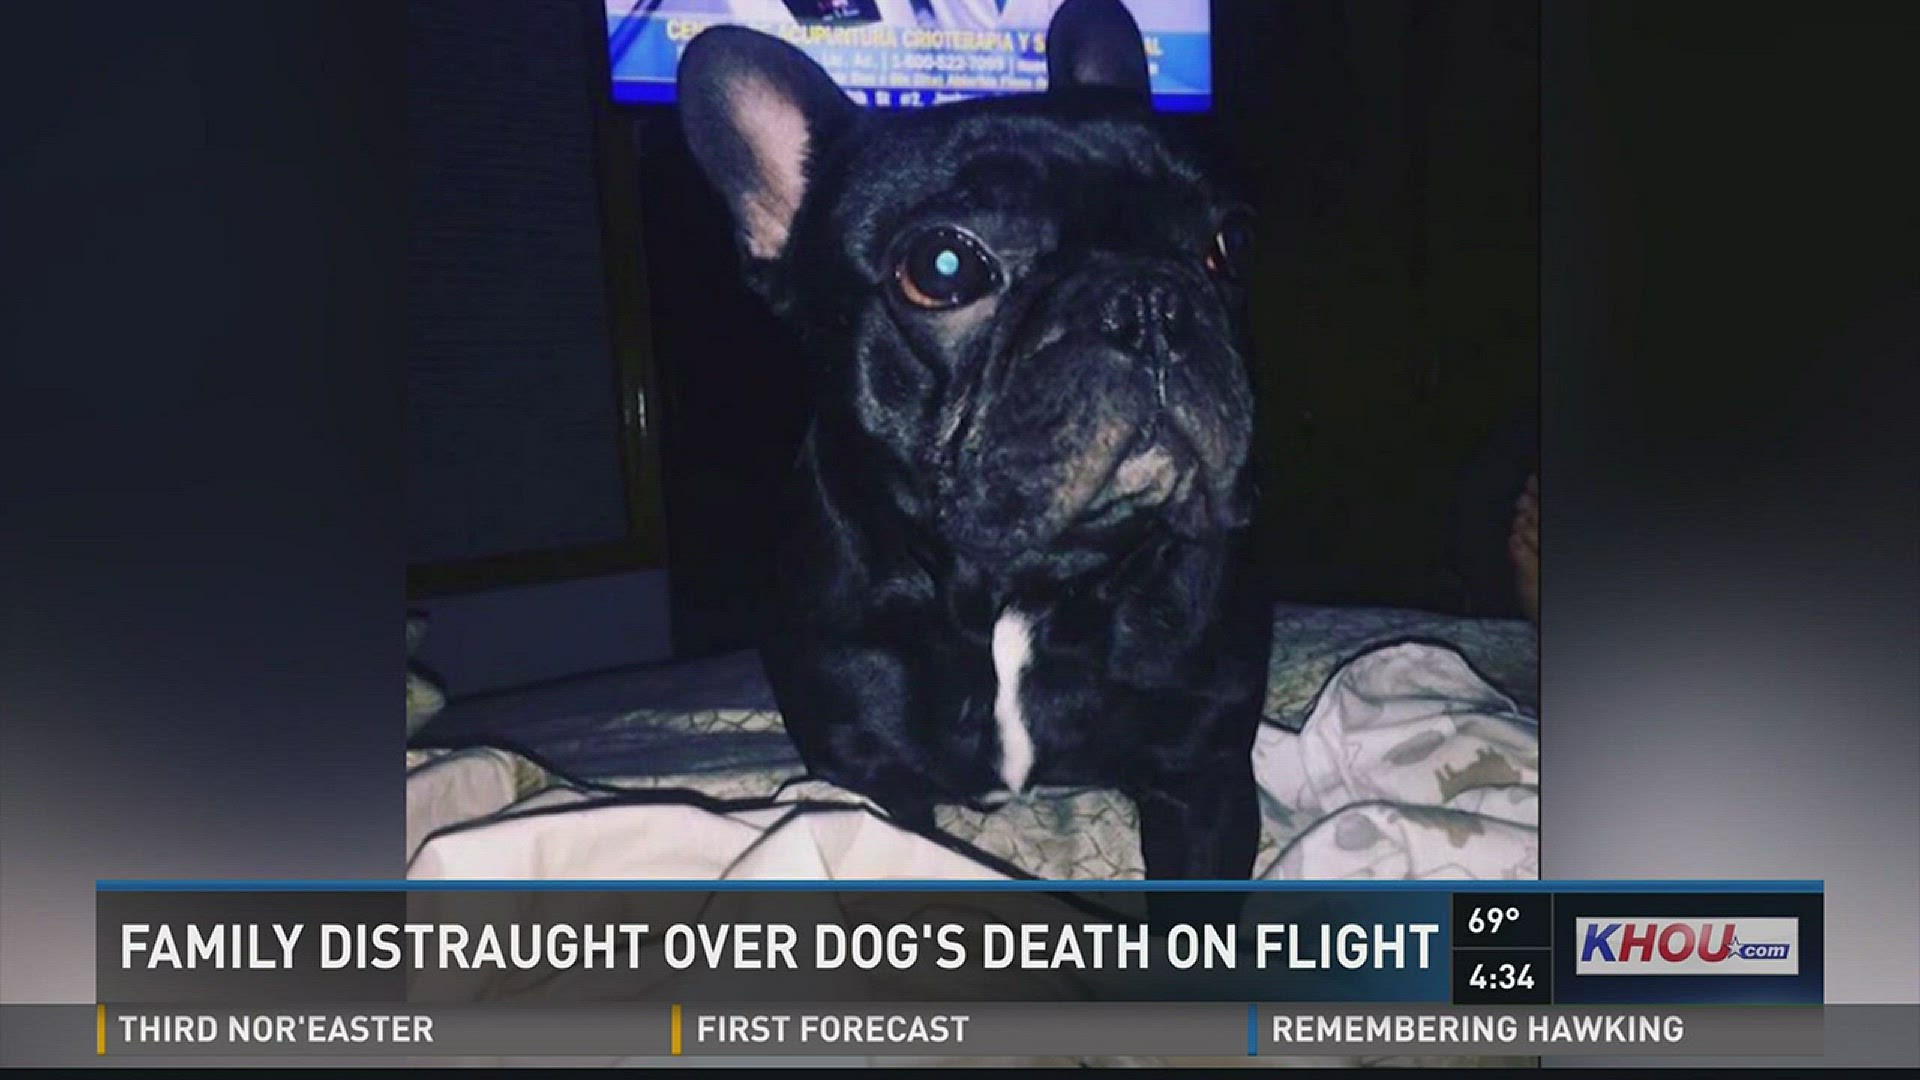 United Airlines is now saying that a flight attendant didn't understand that there was a dog in the carrier when it was put in the overhead bin.